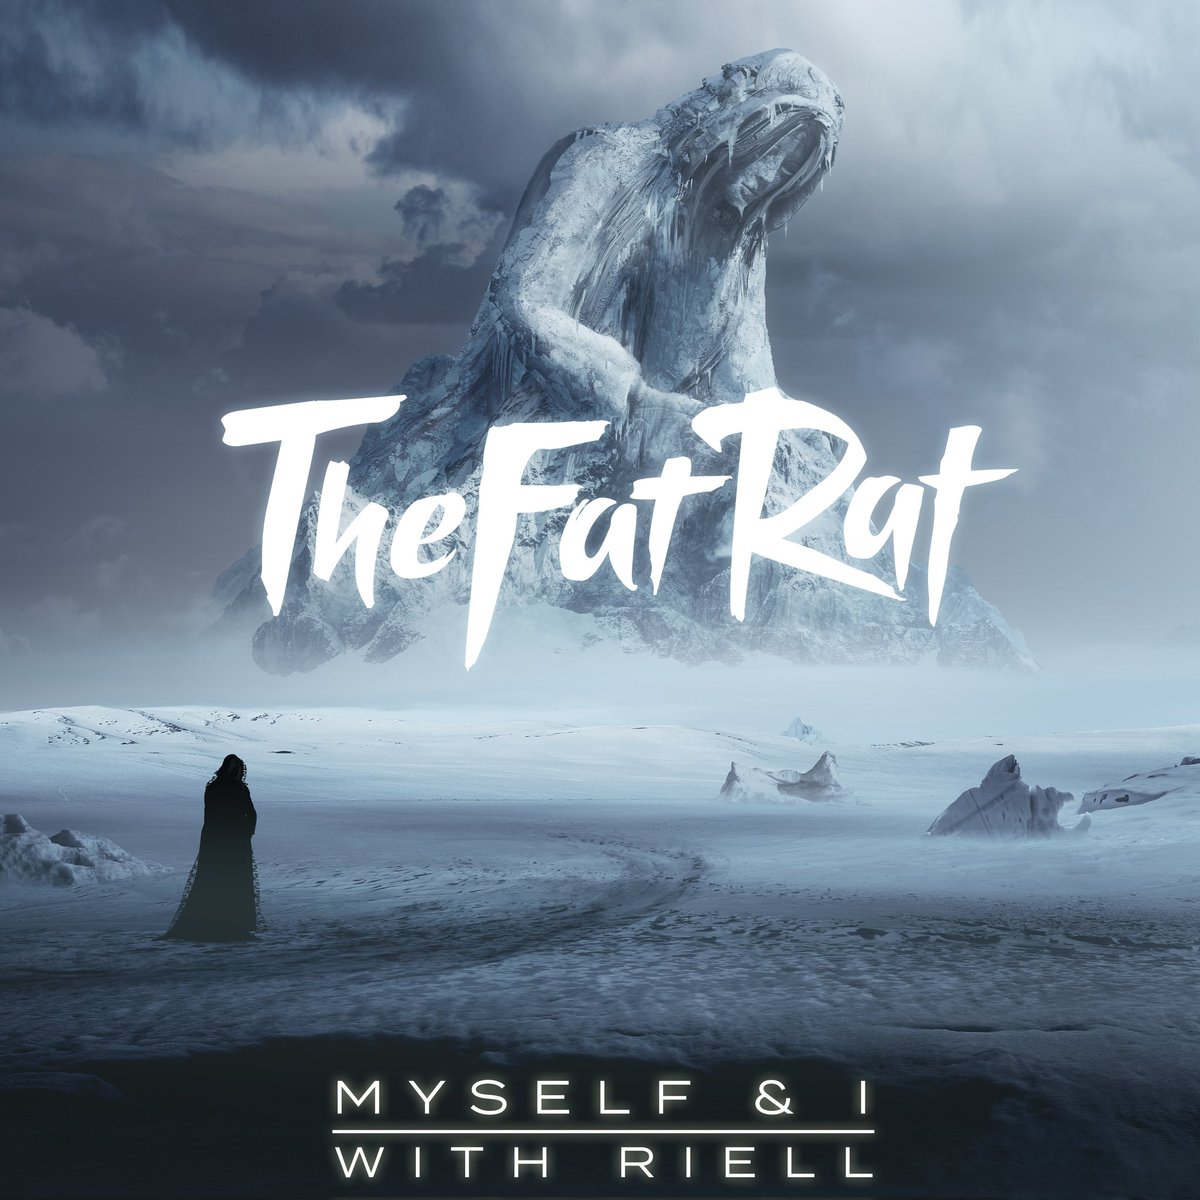 New song 'Myself & I' with RIELL is coming Apr 26th! You can already Pre Save it here: thefatrat.ffm.to/chapter6 Art by @gtgraphics_de